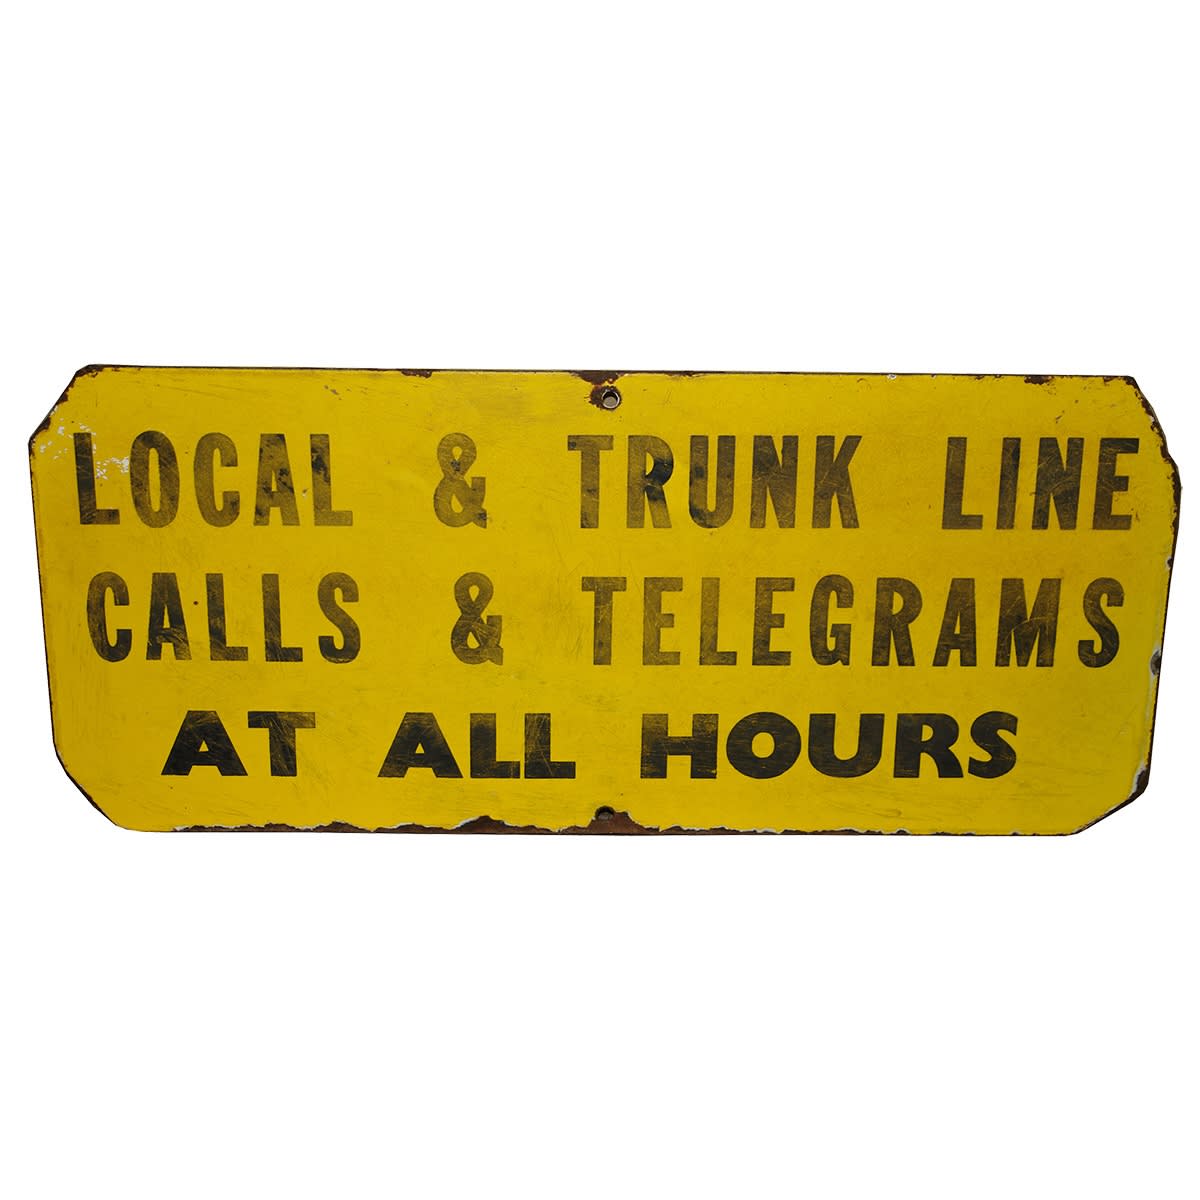 Enamel Sign. Local & Trunk Line Calls & Telegrams at all hours.